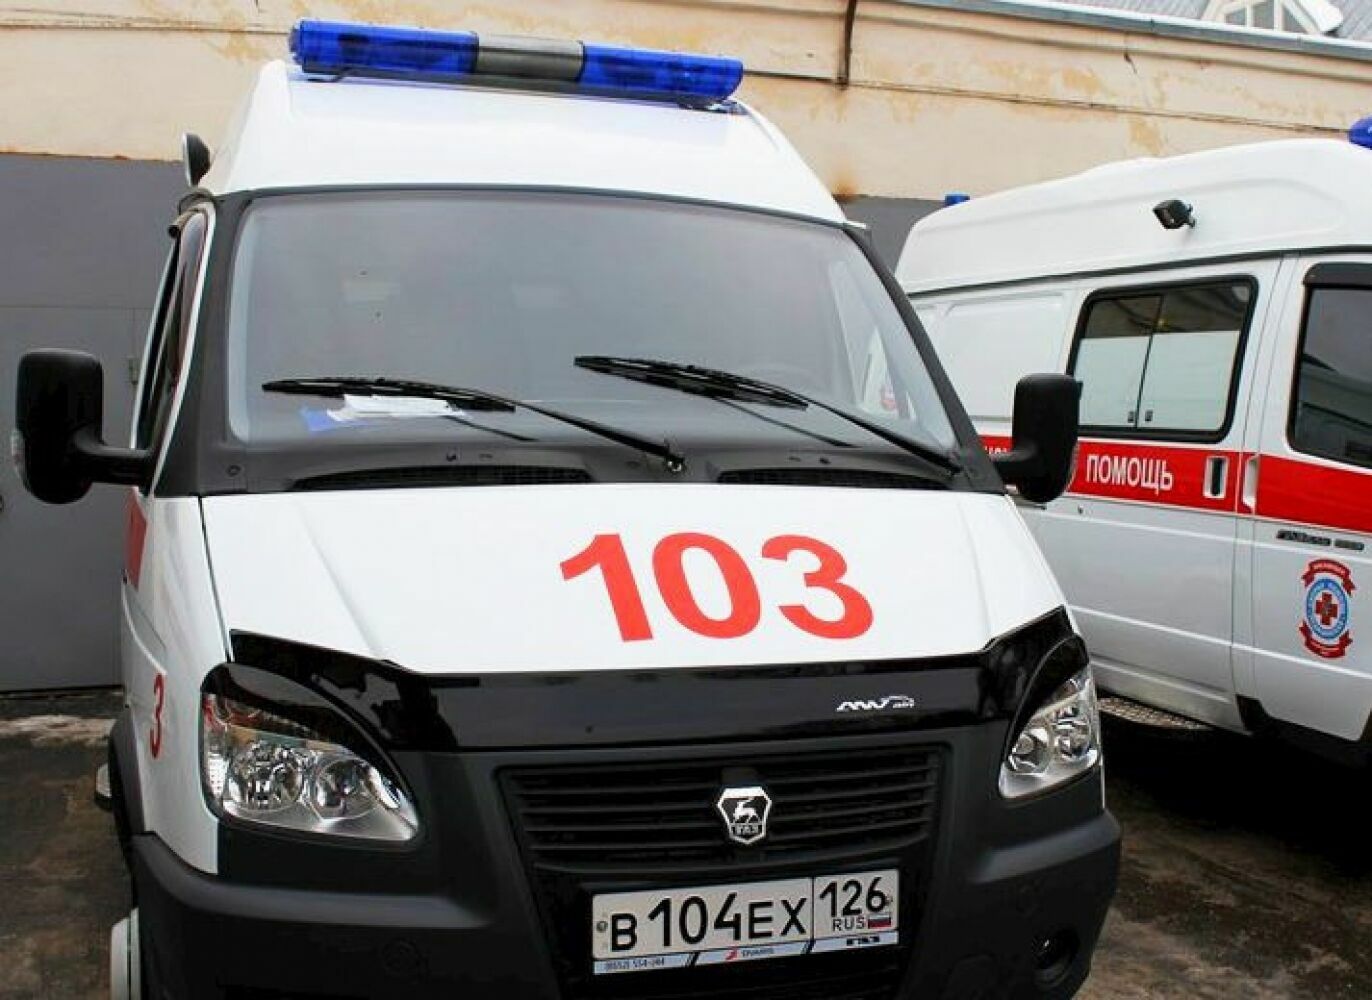 In the Stavropol Territory 15 people were injured in a grenade explosion